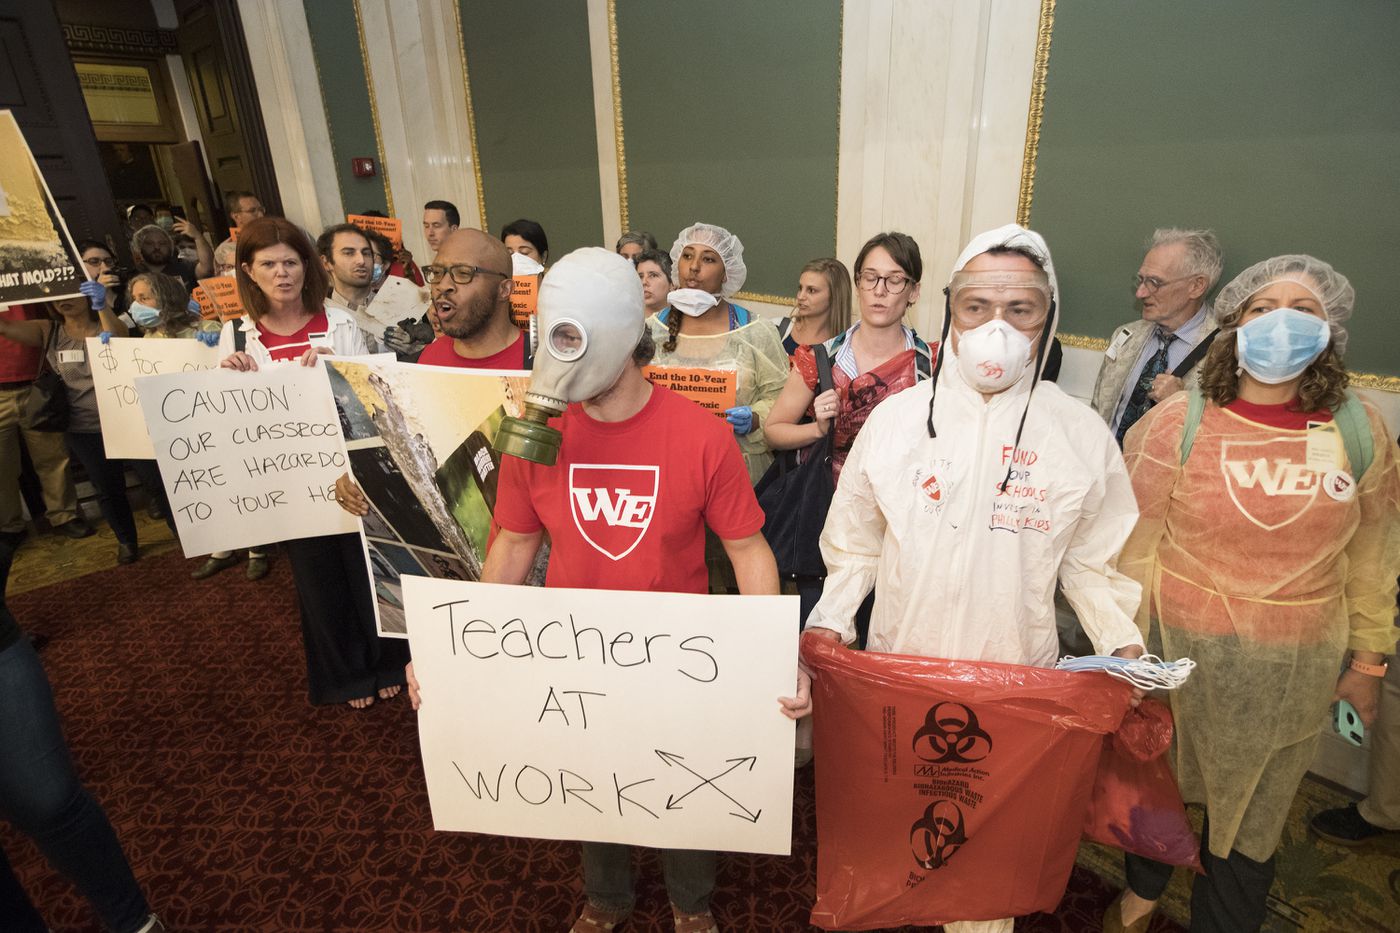 Teachers led by Our City, Our Schools descended on City Council with evidence of the toxic conditions inside their schools on June 5, 2018. They are urging increased funding of schools. They are shown entering Council Chambers.